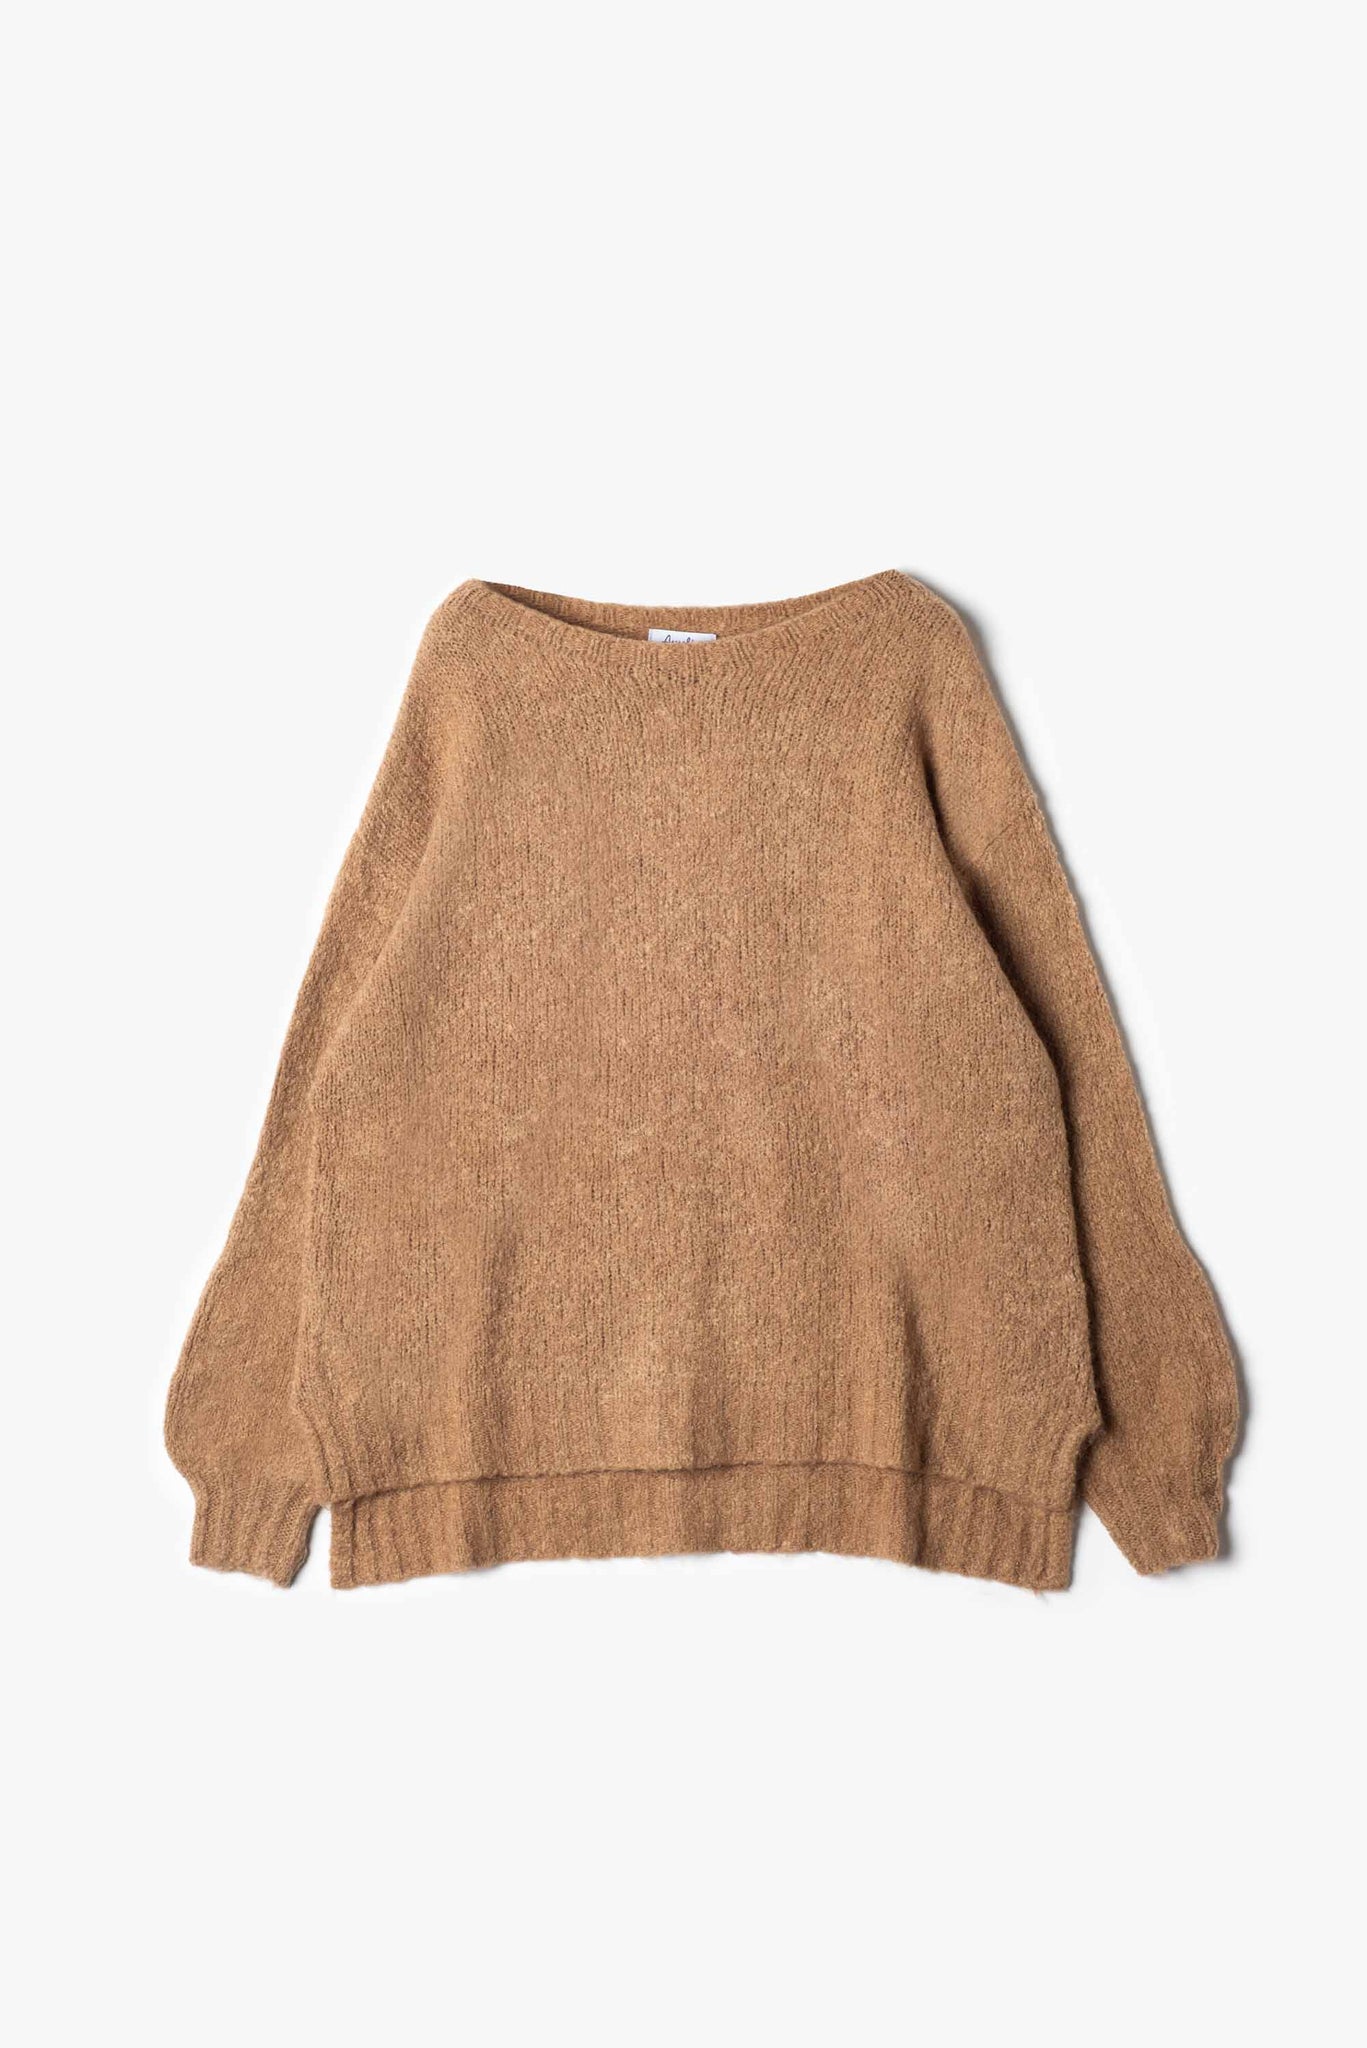 Oversized pullover with side slits.